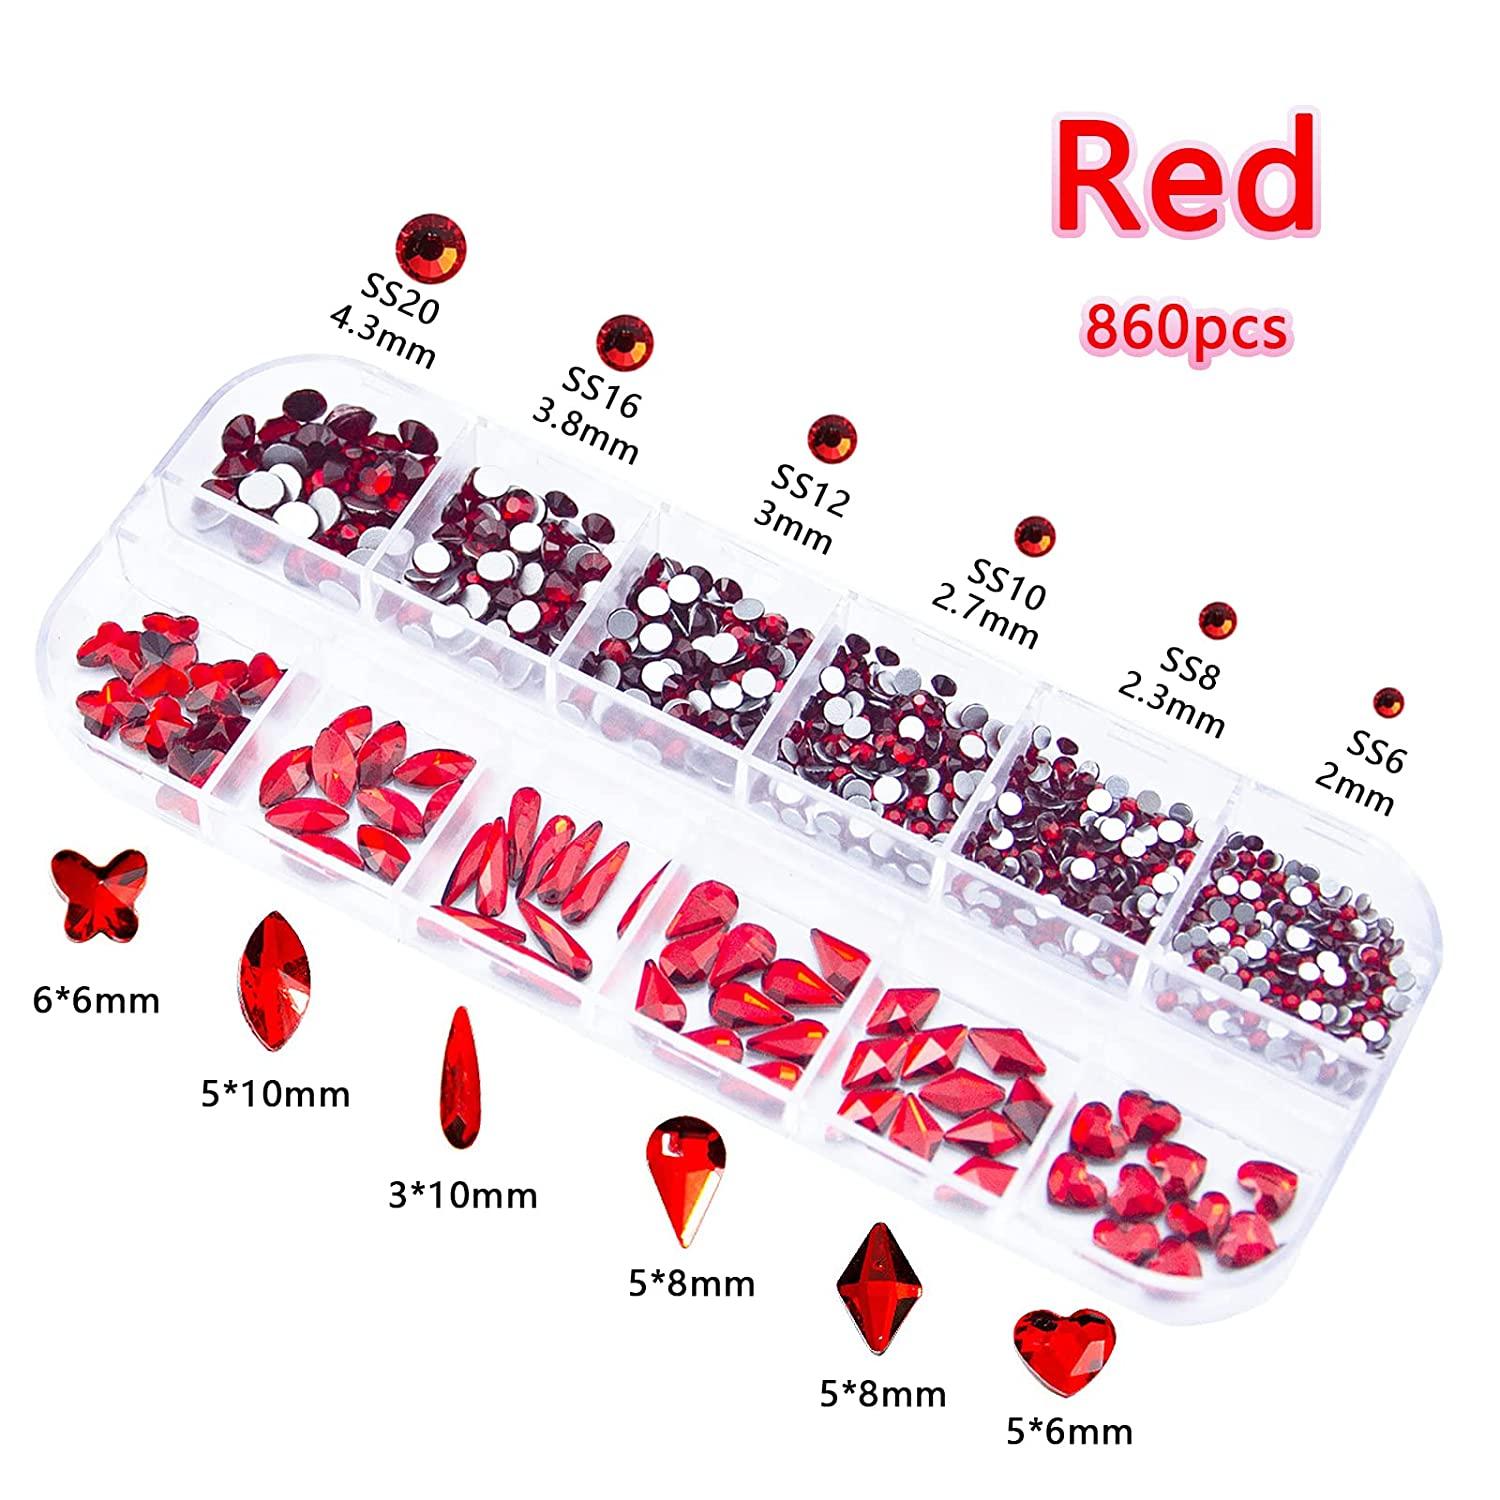  2120Pcs Red Black Nail Rhinestones Crystals Glass Gems Stones  Multi Shapes Sizes Red Black Round Beads Nail Crystals Flatback Rhinestones  for Nail DIY Crafts Clothes Shoes Jewelry : Beauty & Personal